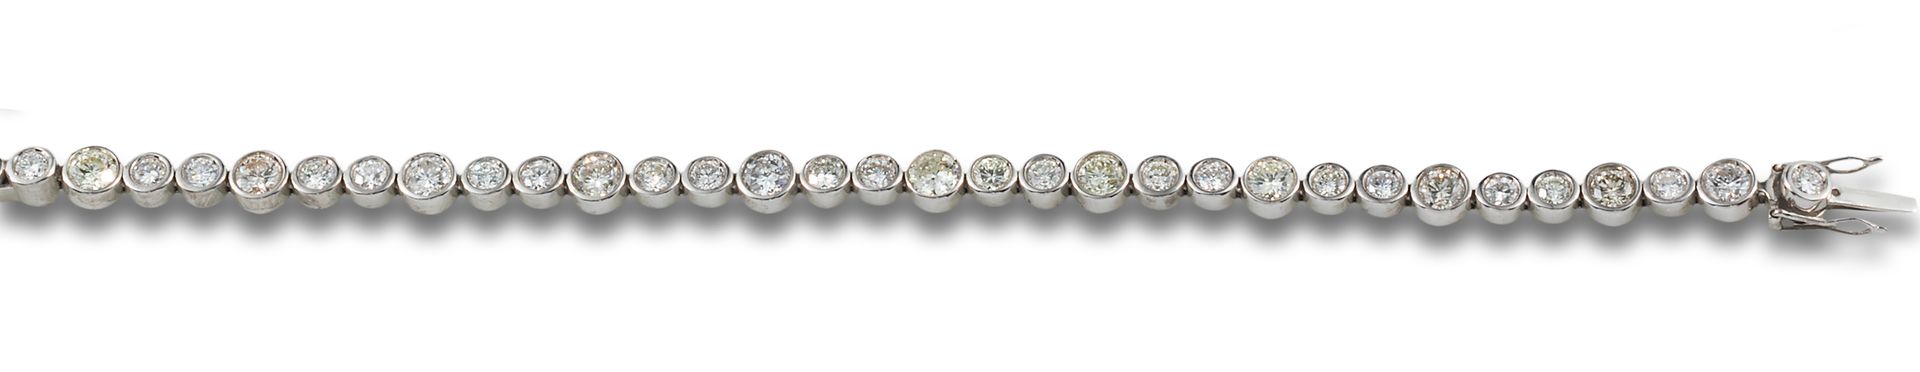 18 kt white gold riviere bracelet. Formed by a row of diamonds set in chaton, es&hellip;